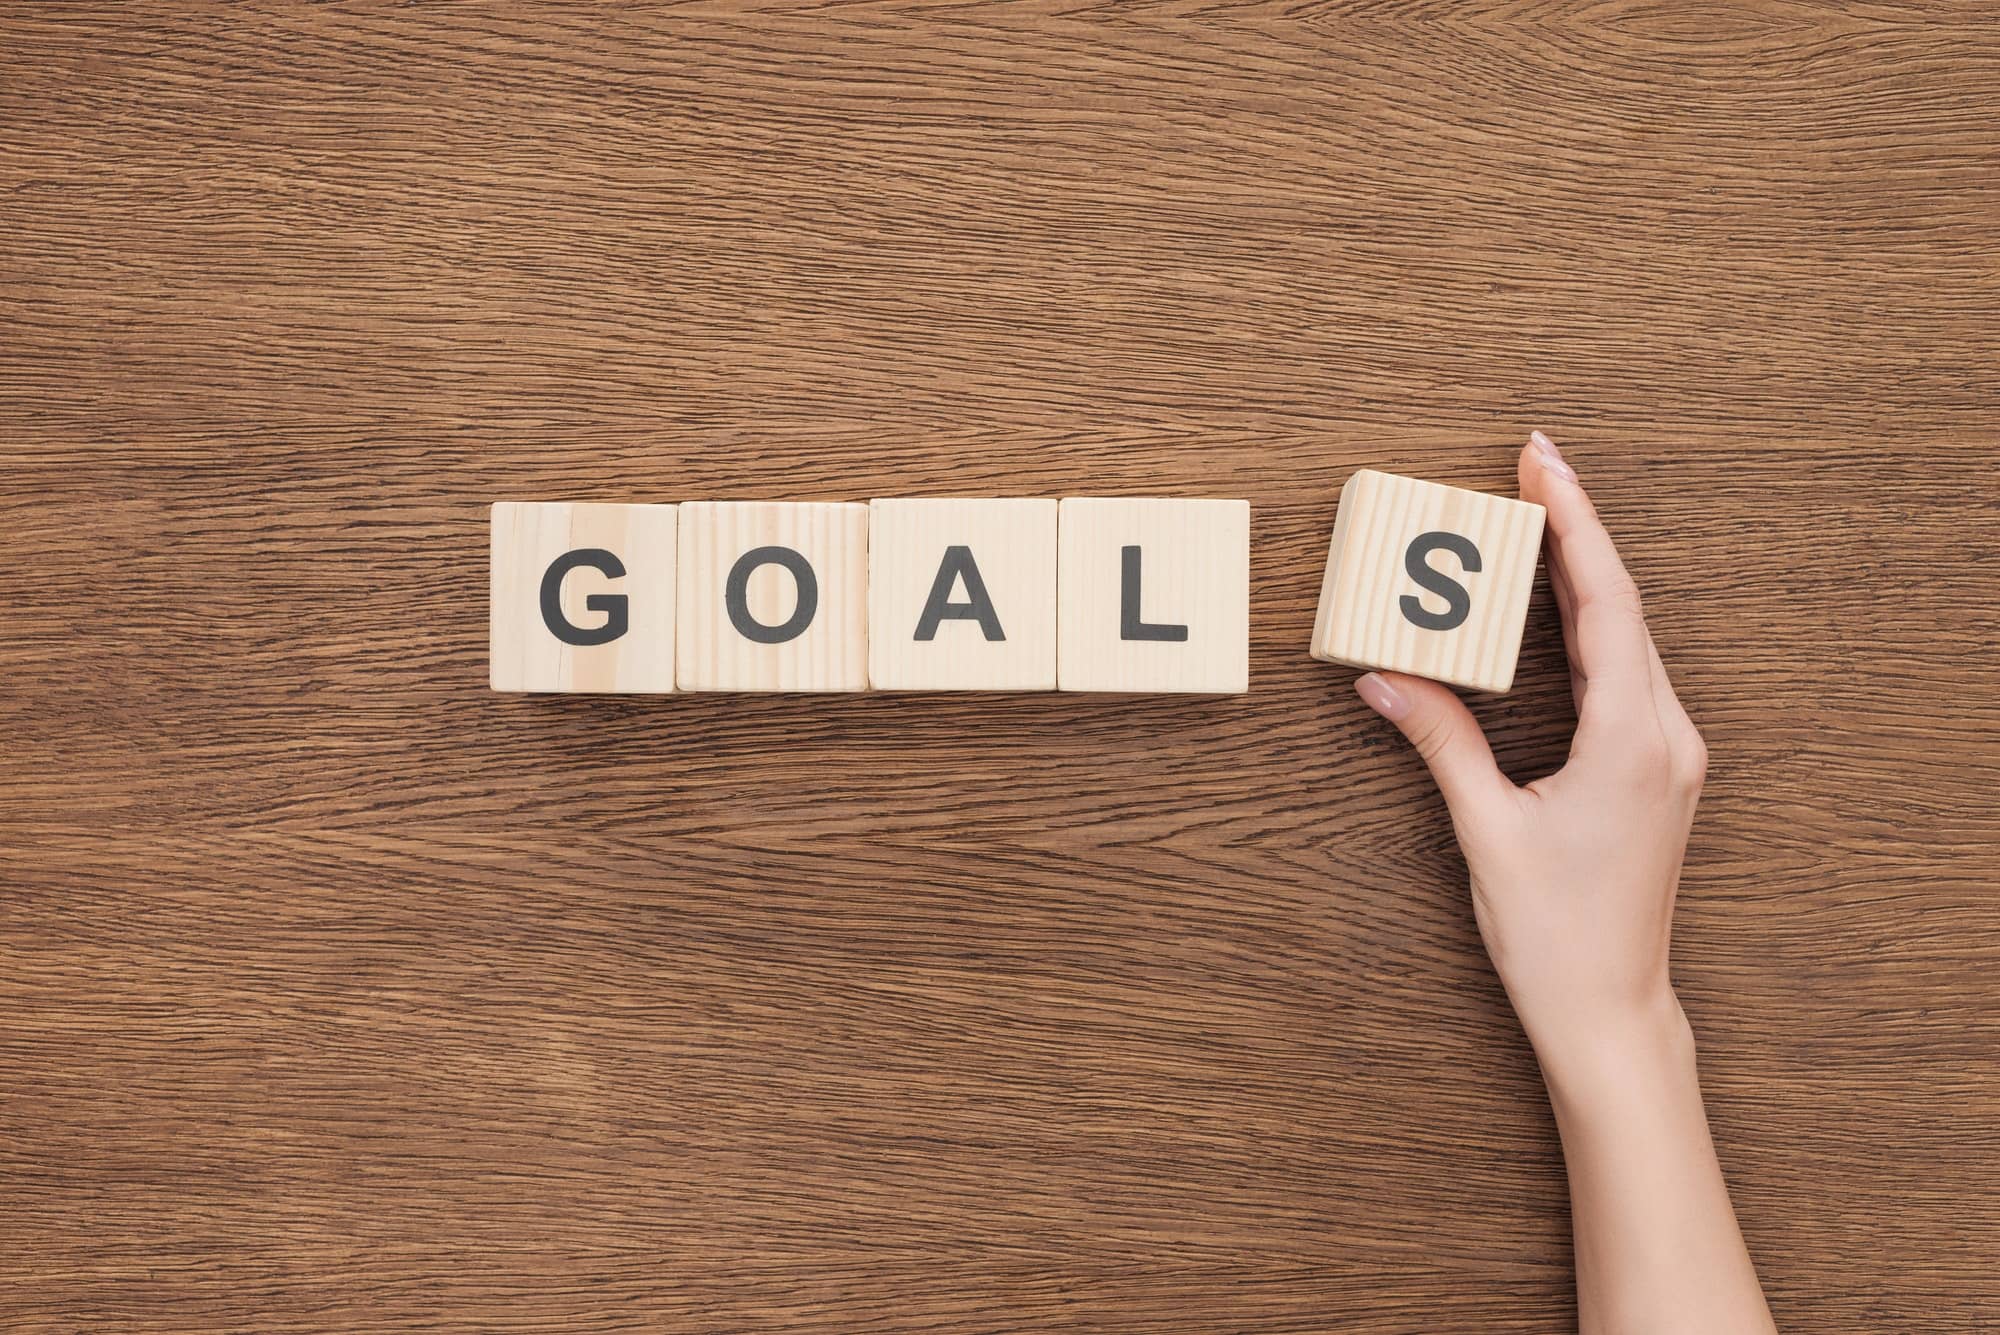 cropped view of person adjusting 'goals' word made of wooden blocks on wooden tabletop, goal setting